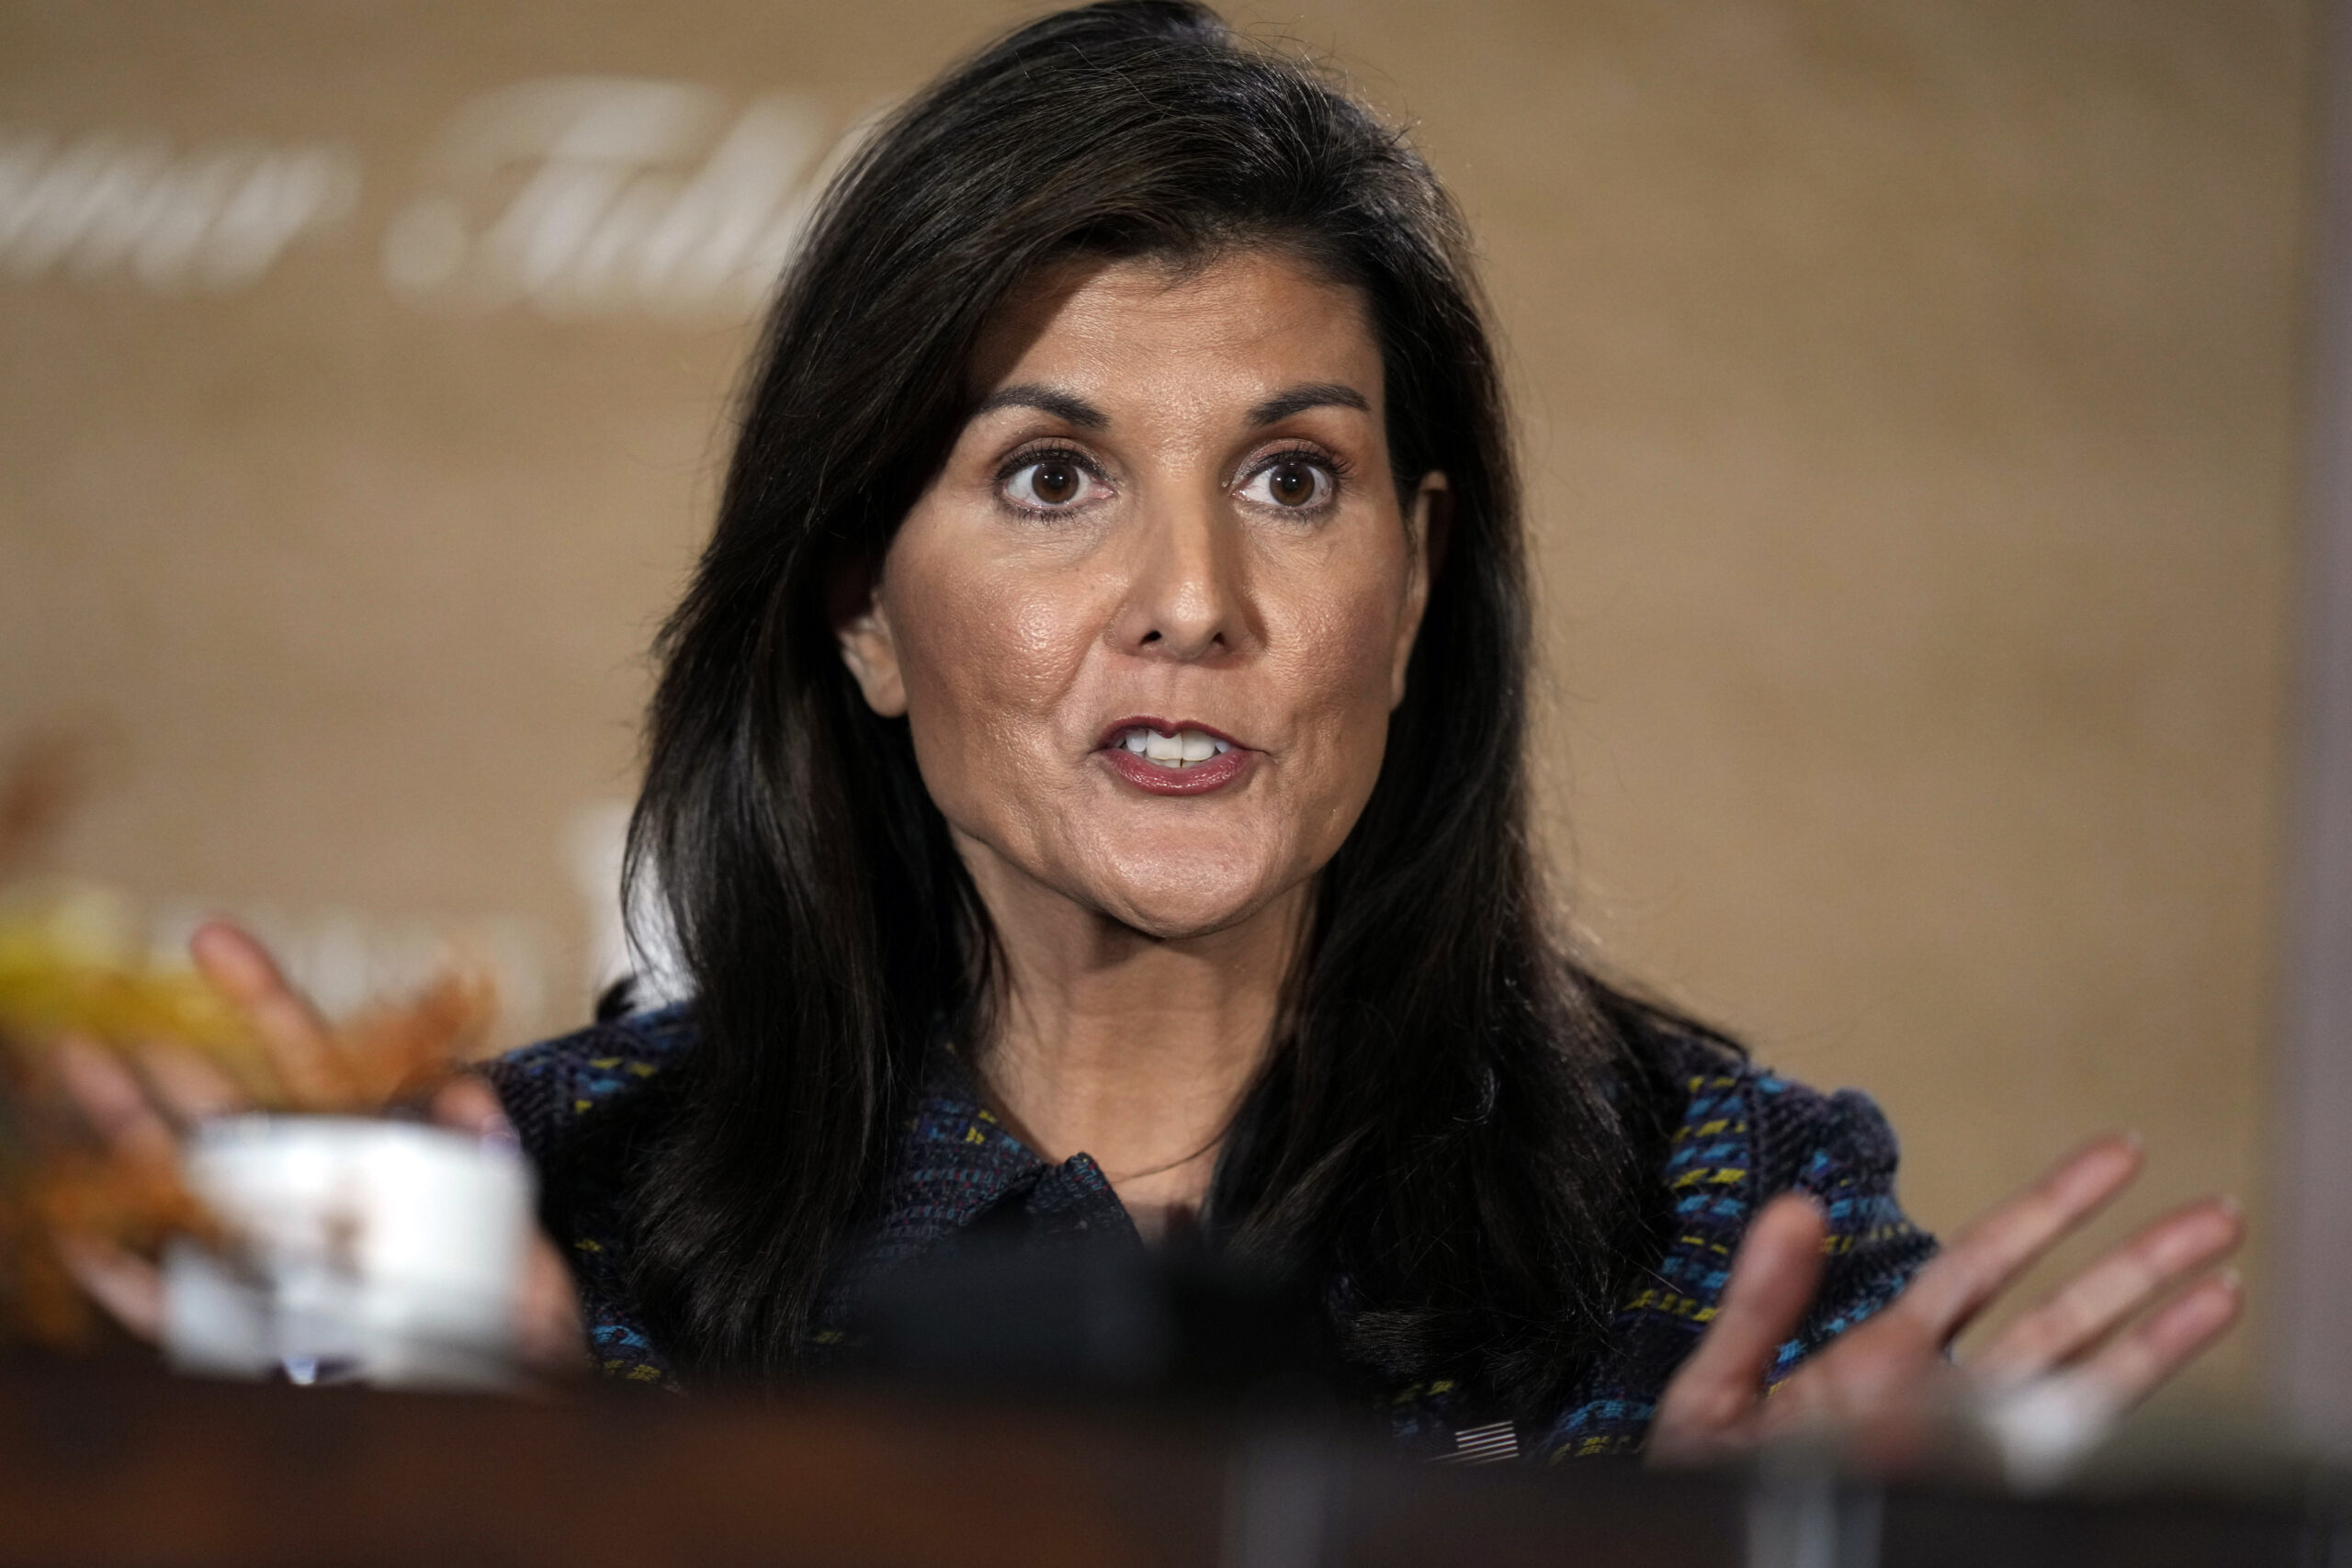 ‘No Moderate’: Biden Campaign Rails Against ‘MAGA Extremist’ Nikki Haley, Claims She Wants to ‘Rip Away Women’s Freedoms’